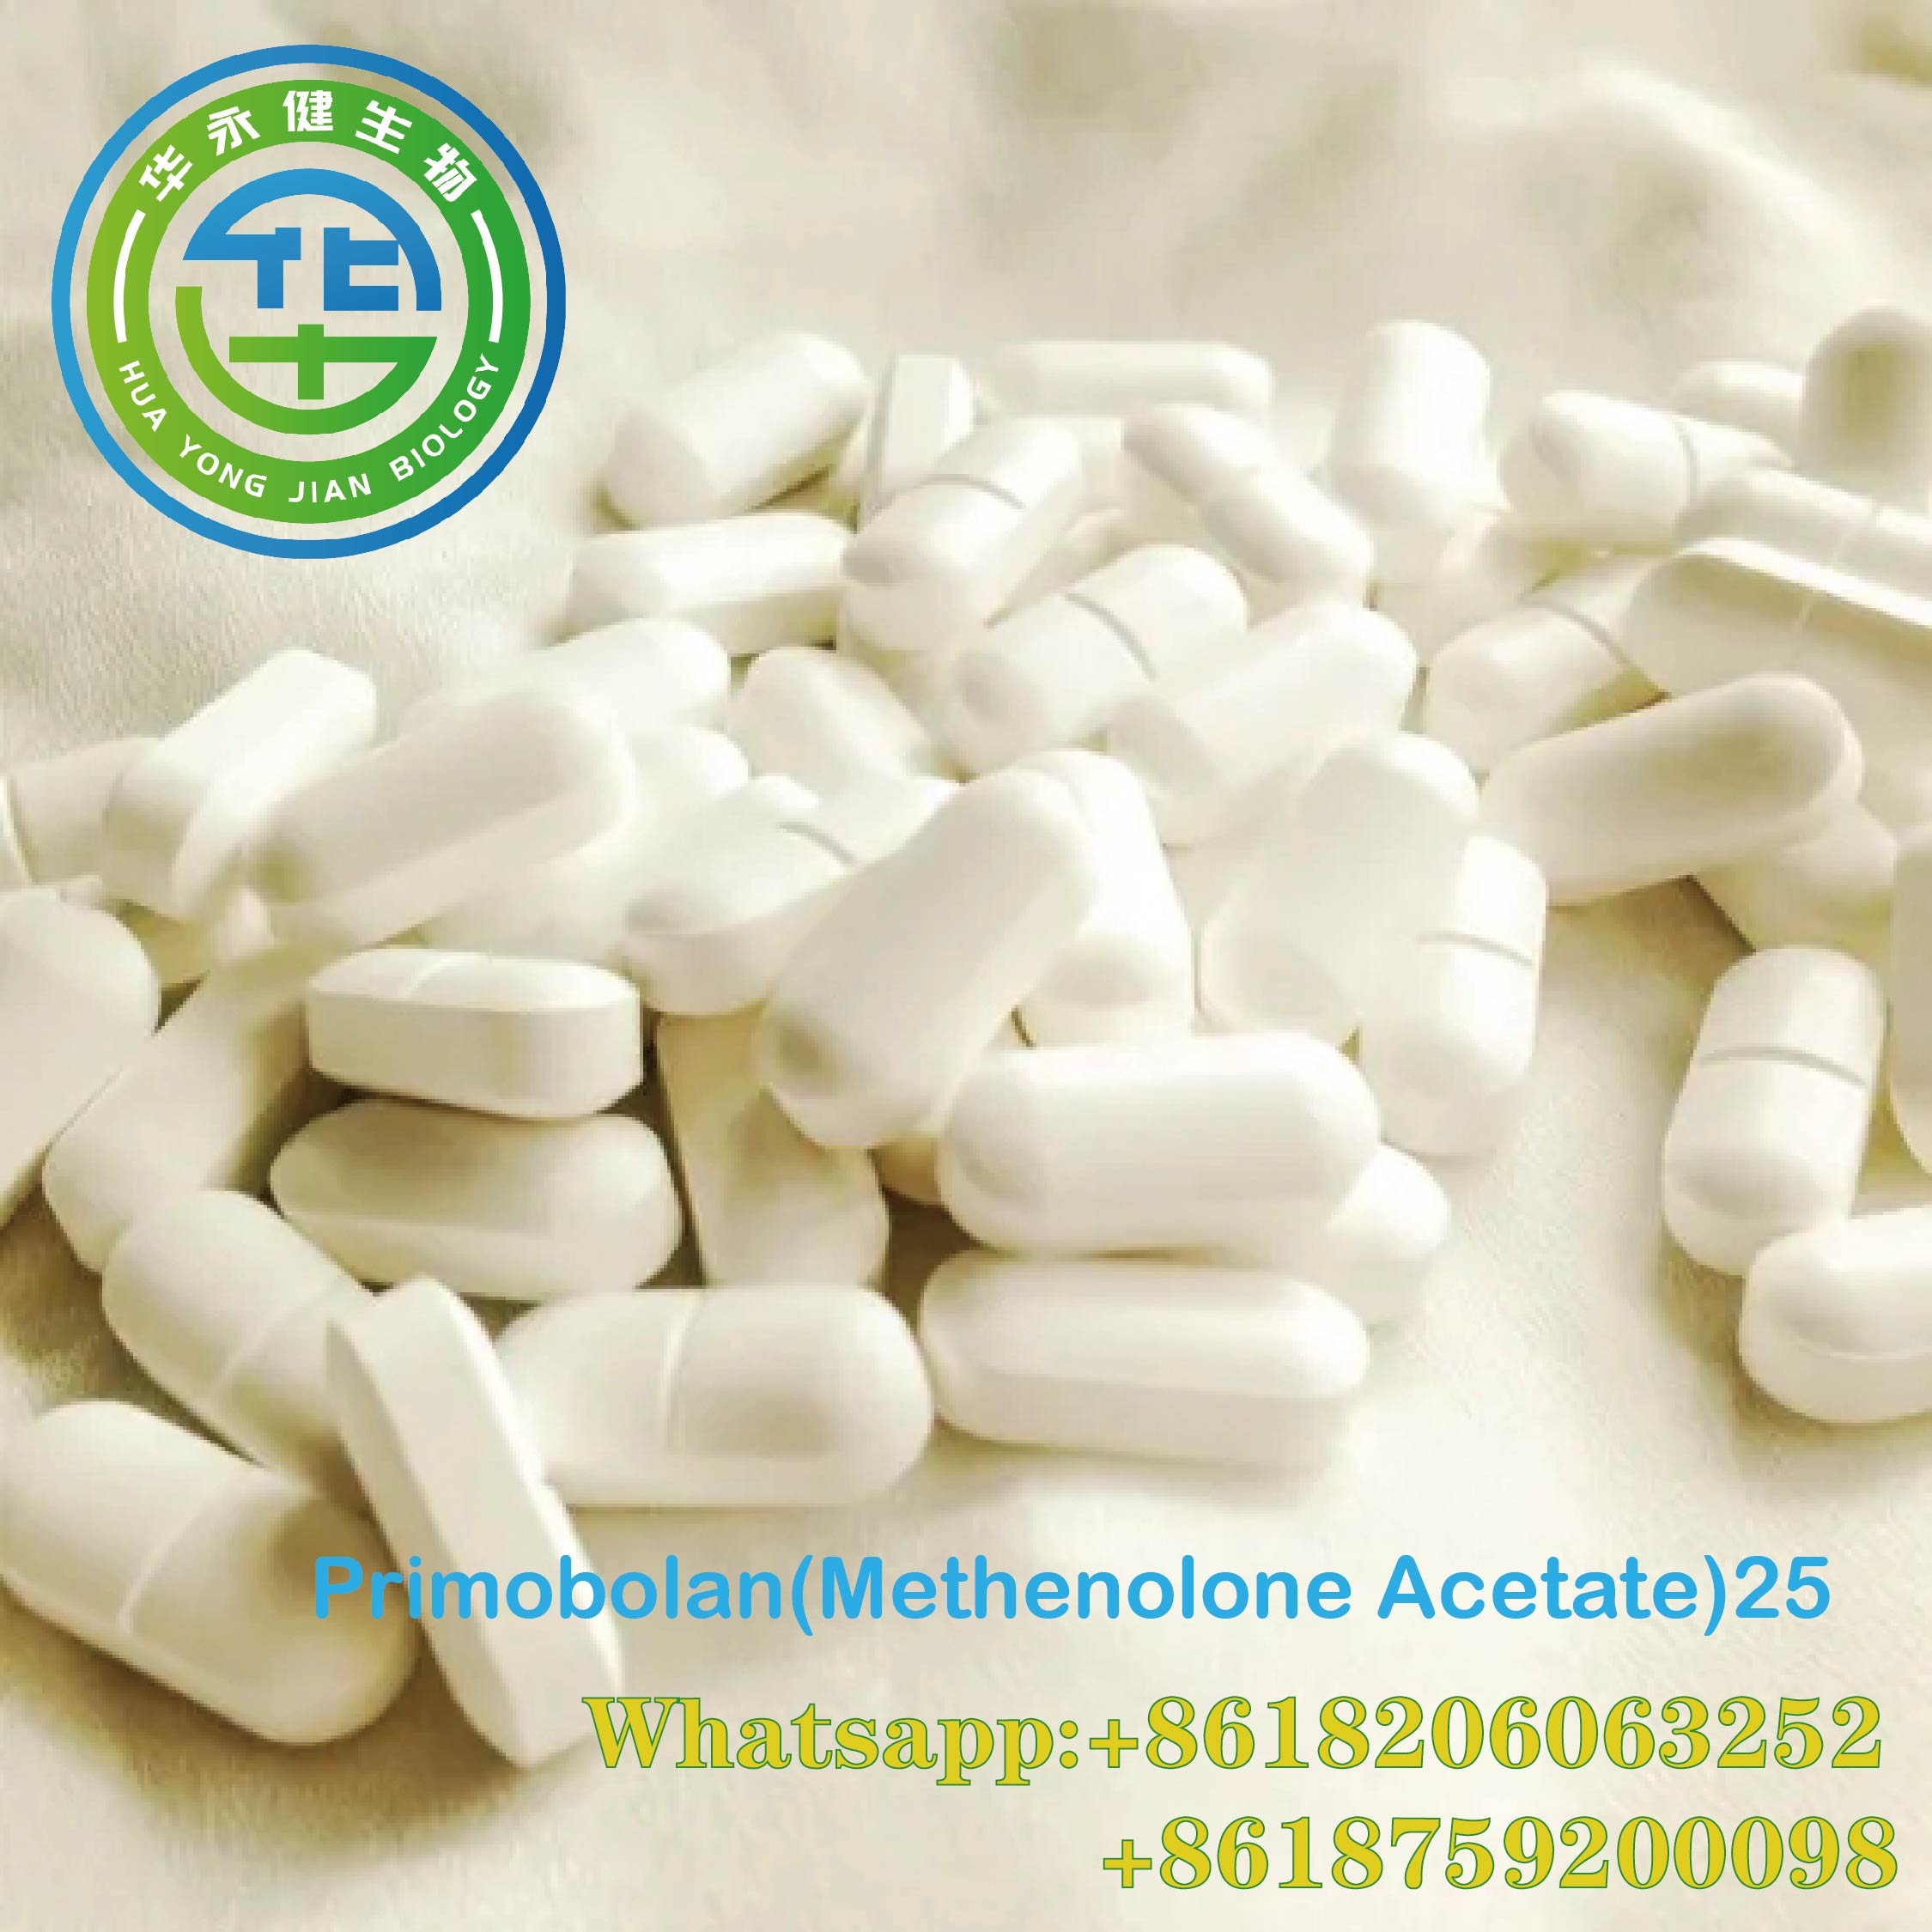  Methenolone Acetate 25mg Tablets USP Long Acting Powder Primobolan 100Pic/bottle Steroids For Bulking Cycle